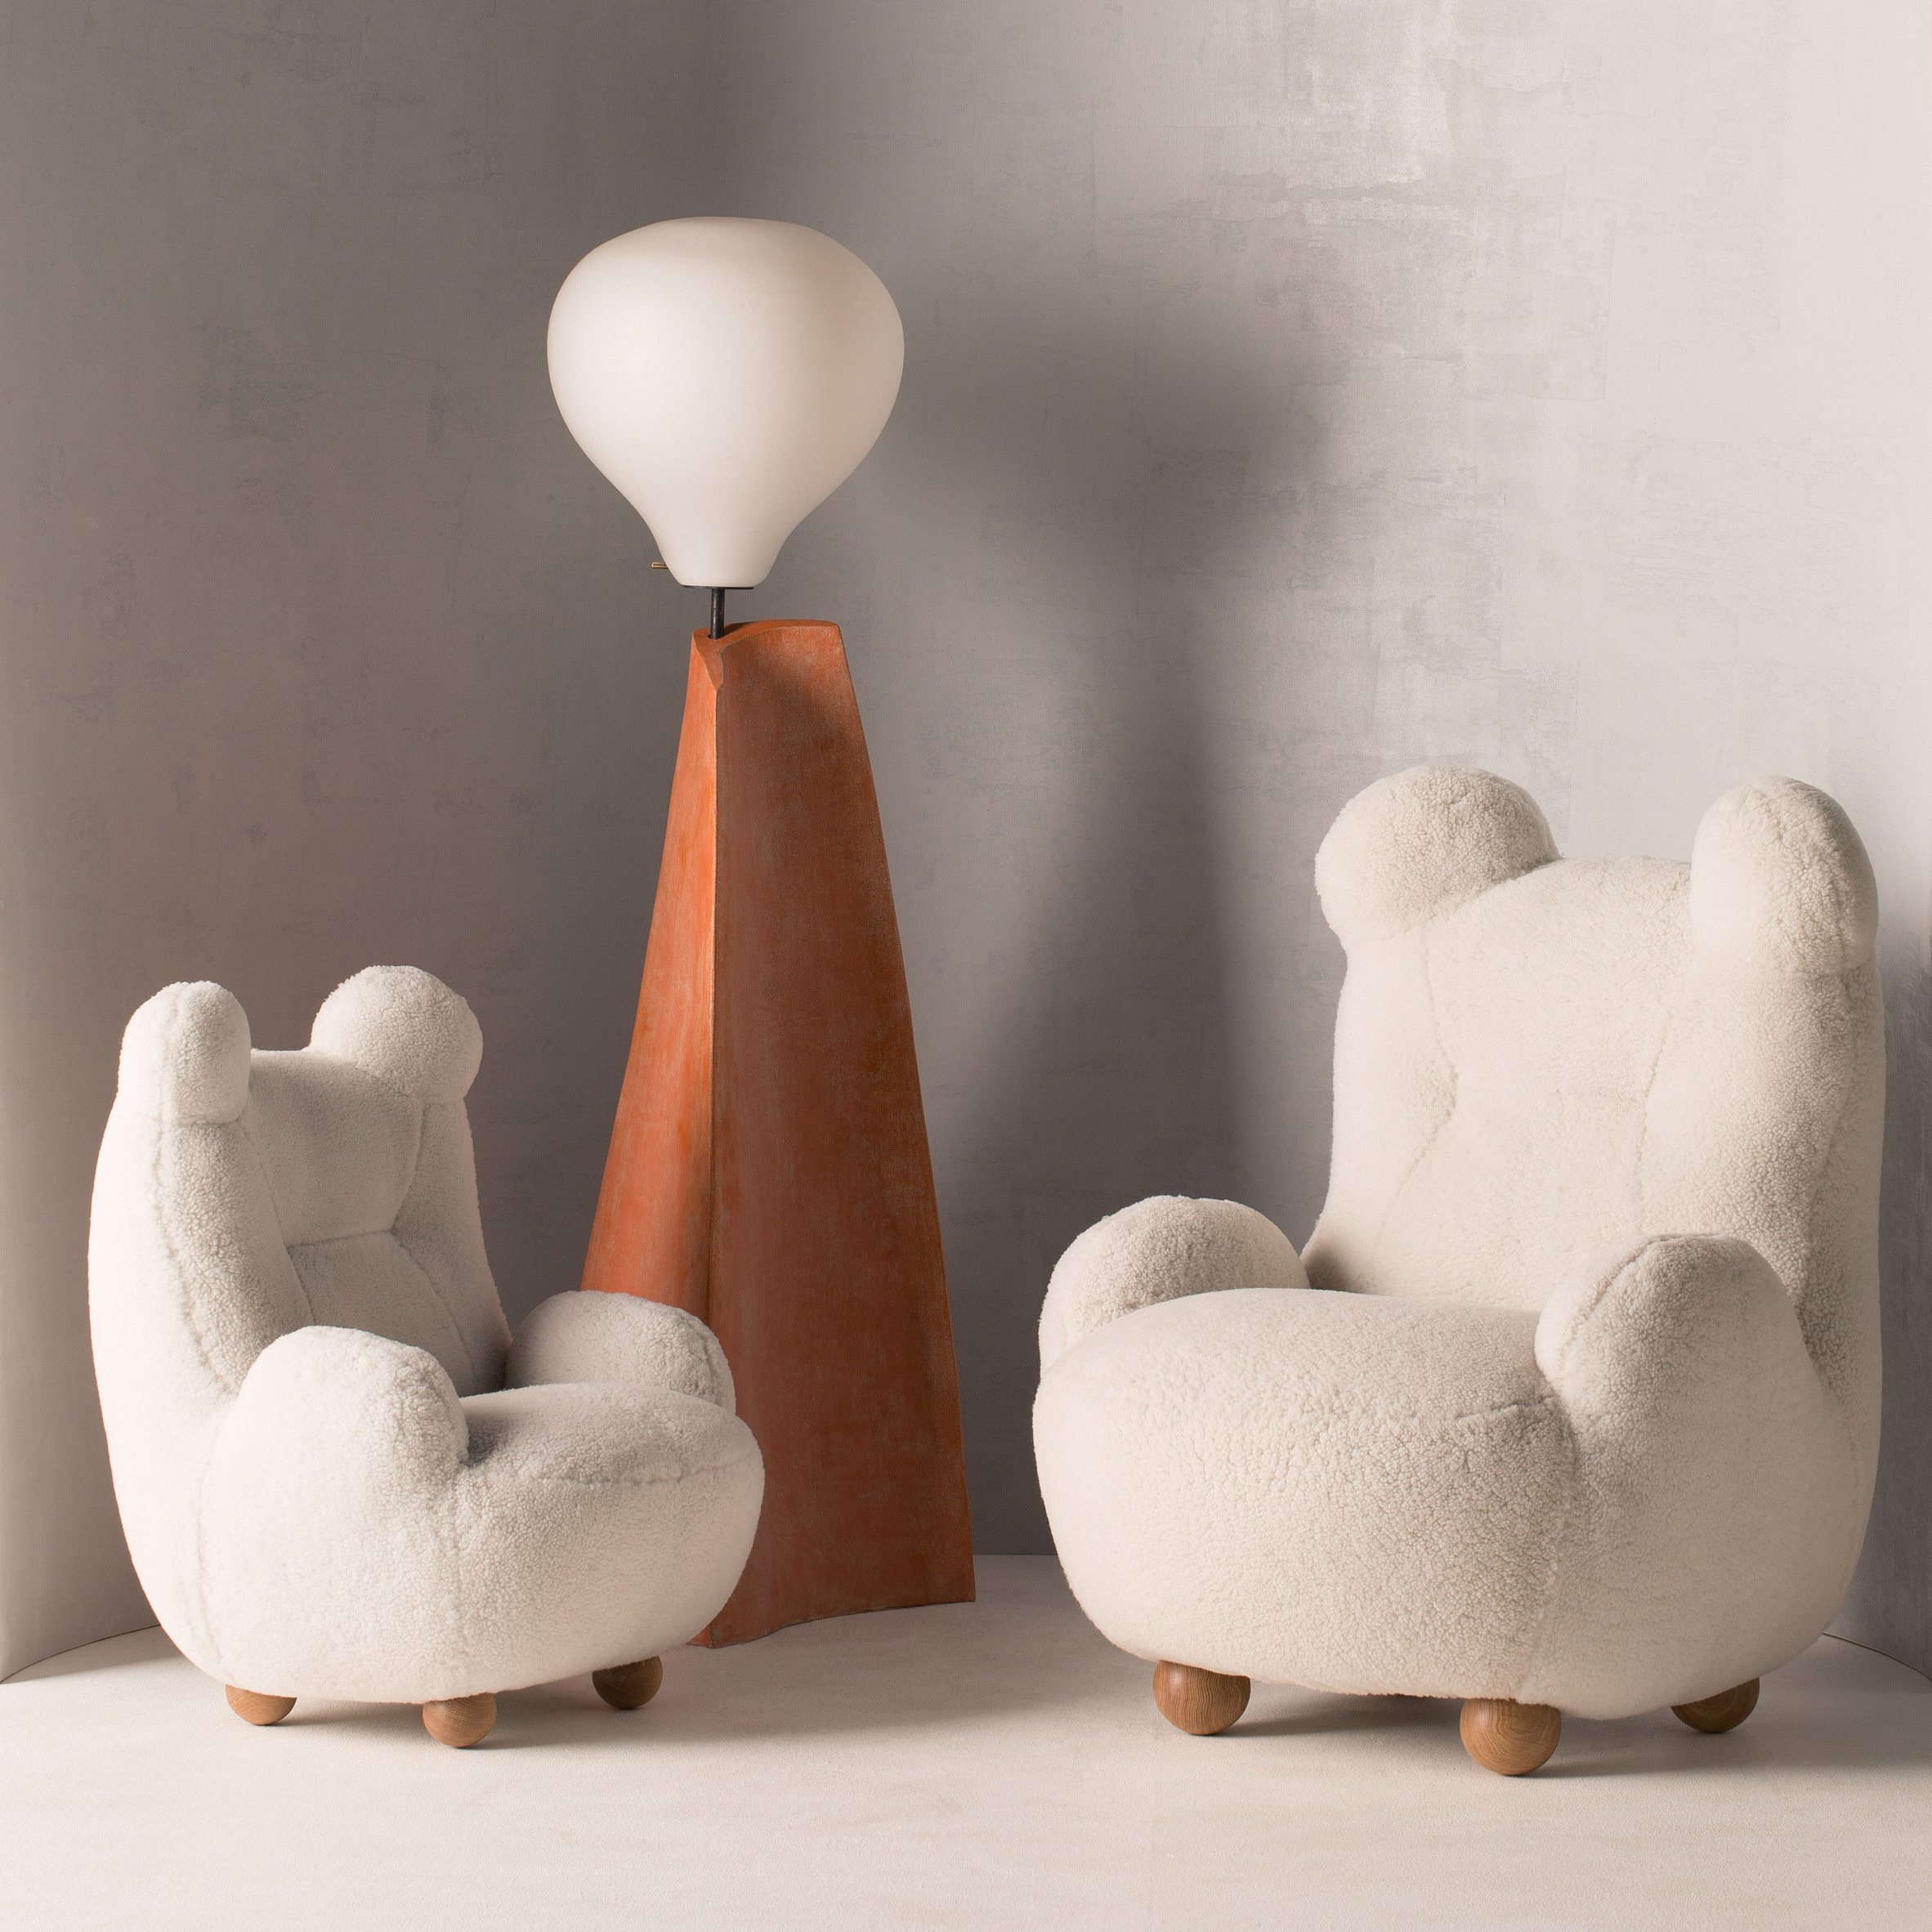 Cuddly bear-like chairs feature in OOPS furniture collection by Pierre Yovanovitch